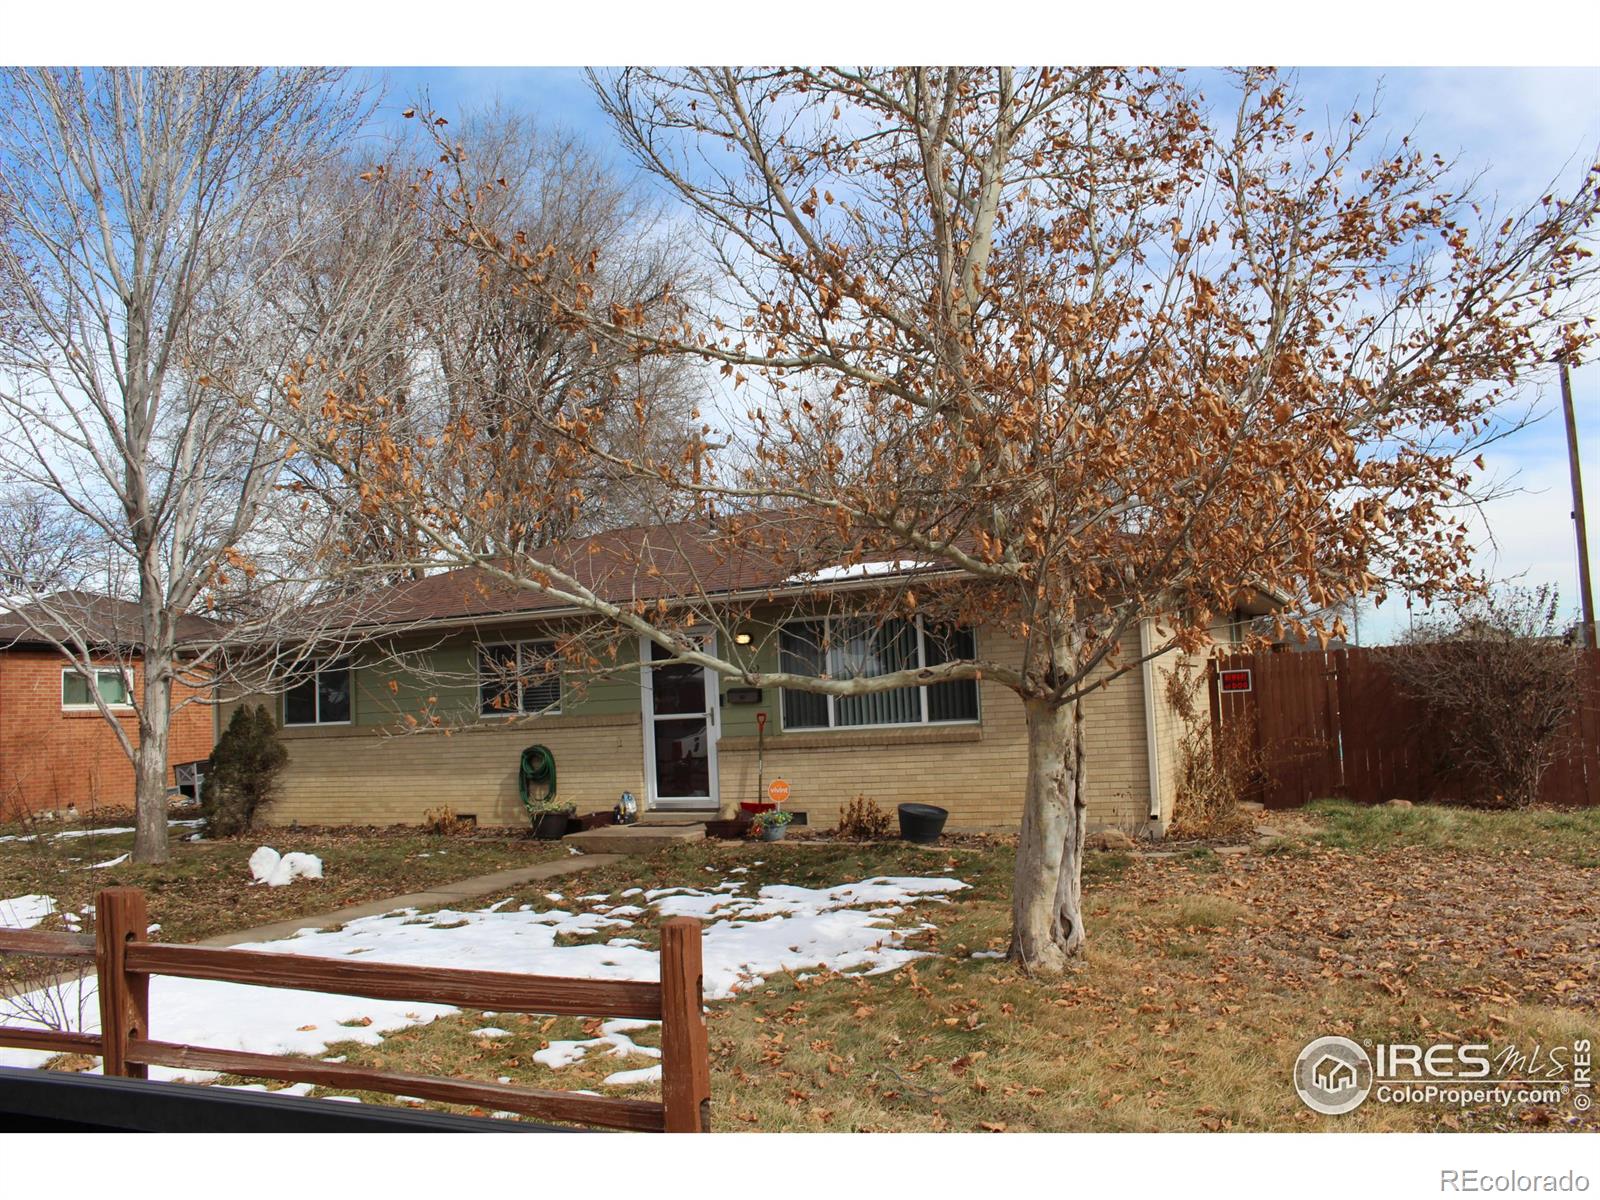 2662  12th Avenue, greeley MLS: 4567891003441 Beds: 2 Baths: 1 Price: $337,000